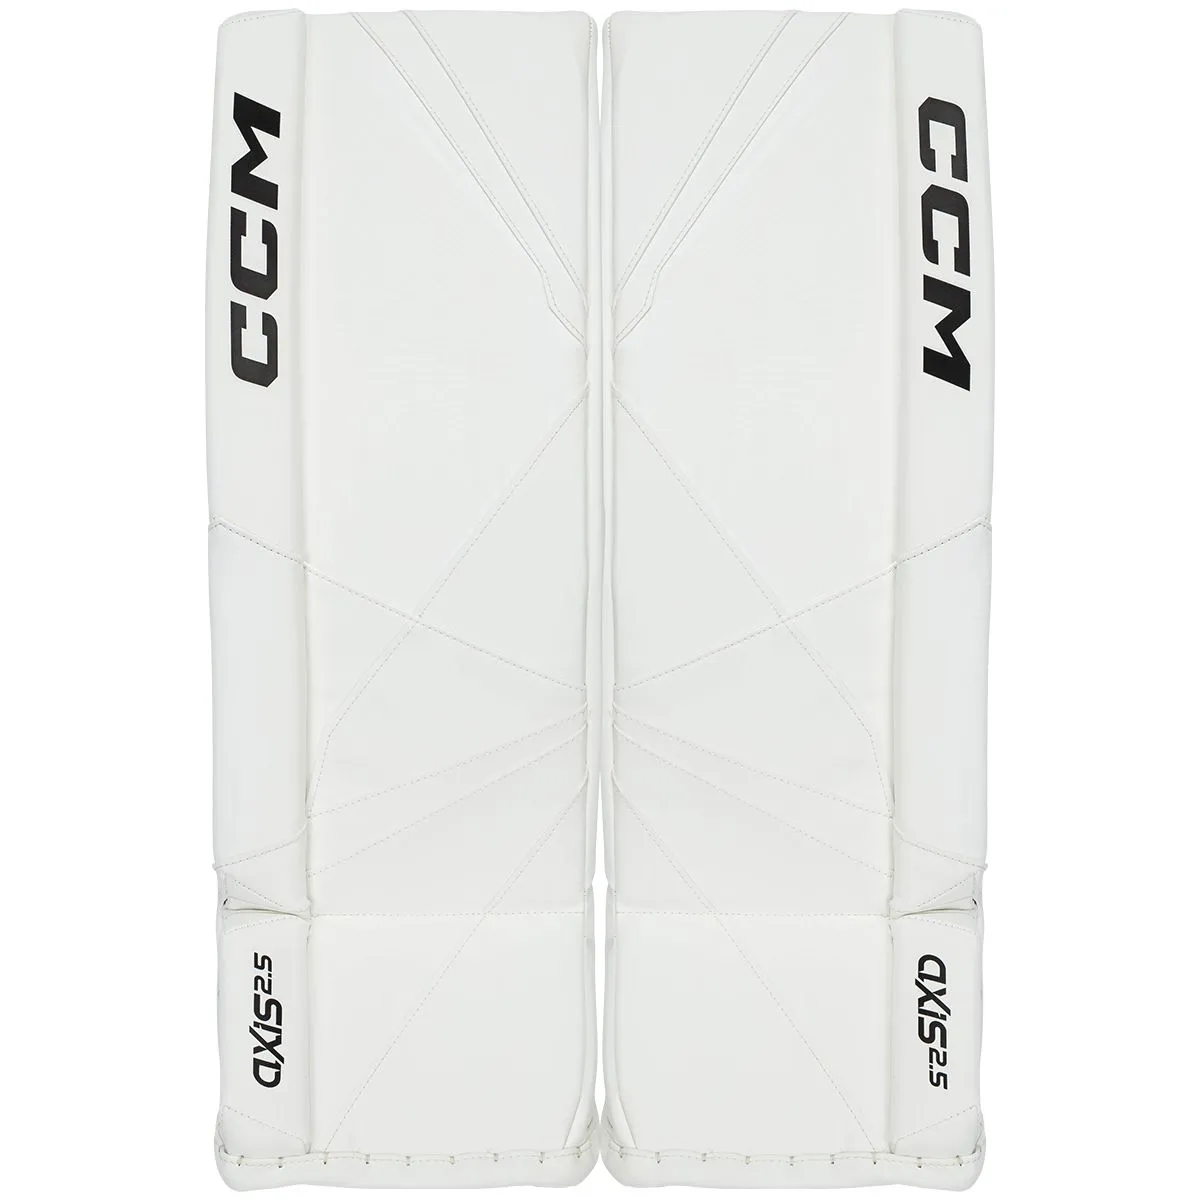 CCM AXIS A2.5 Jr. Goalie Leg Padsproduct zoom image #1